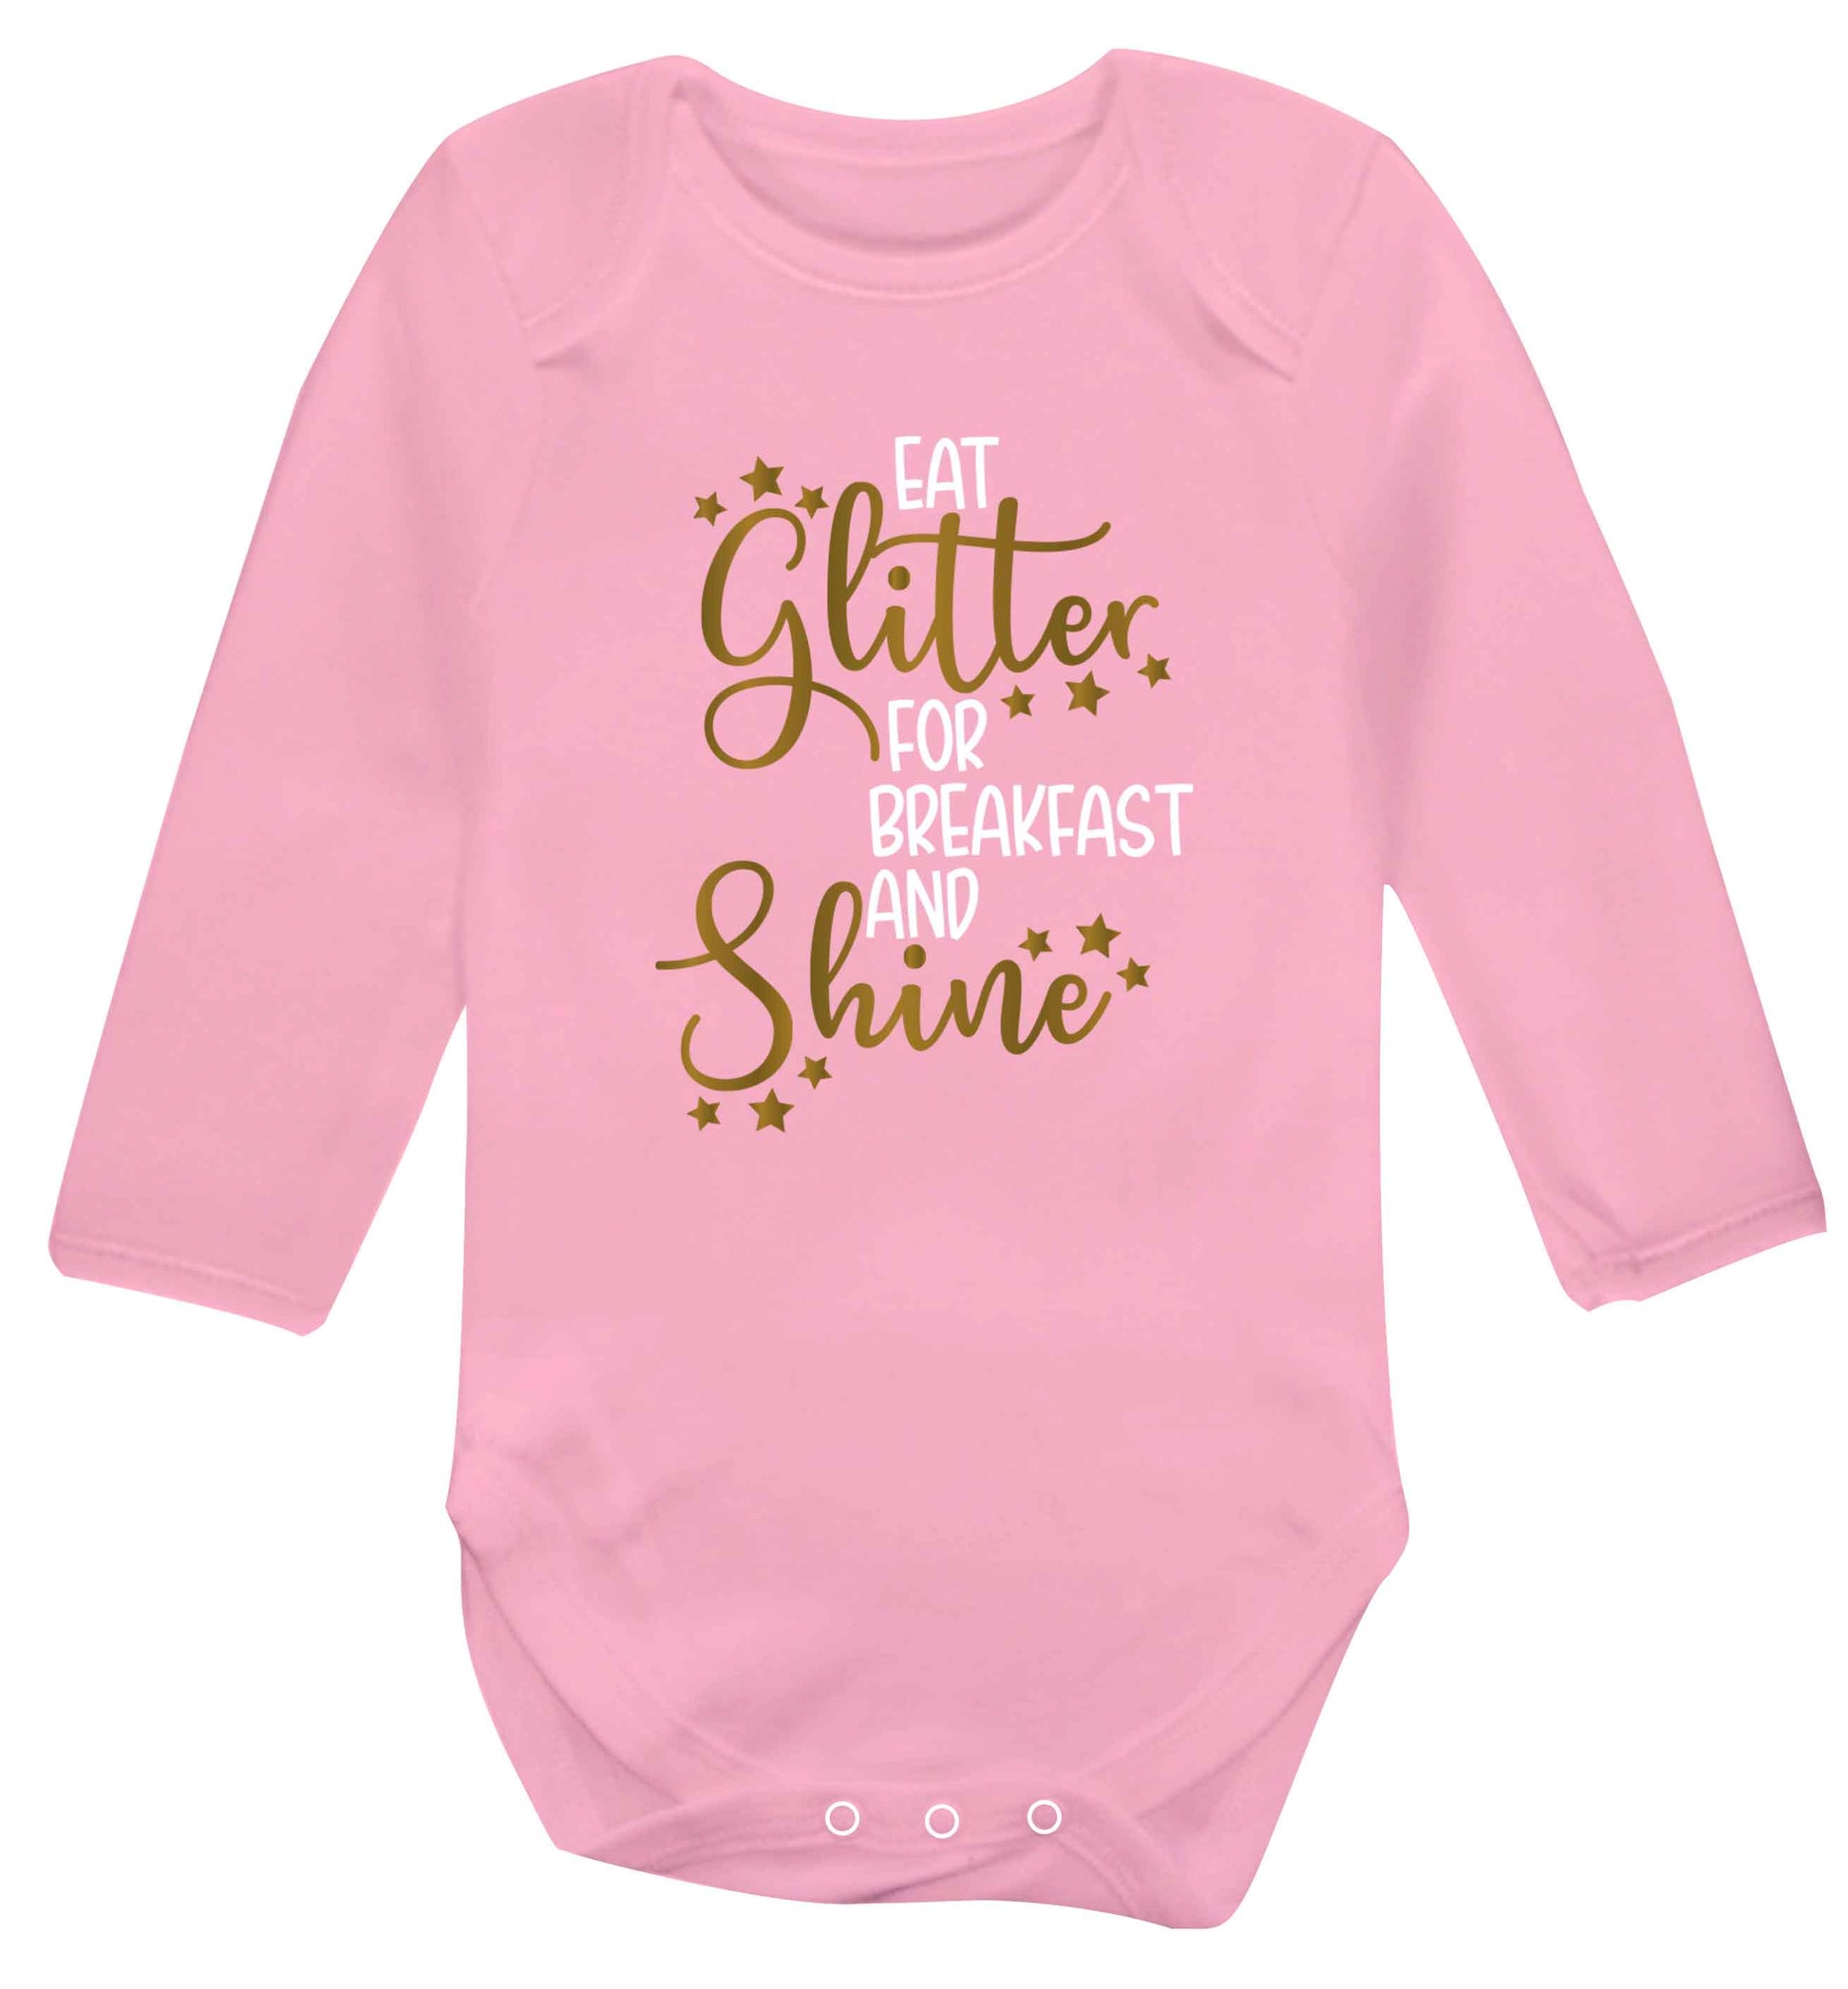 Eat glitter for breakfast and shine all day Baby Vest long sleeved pale pink 6-12 months